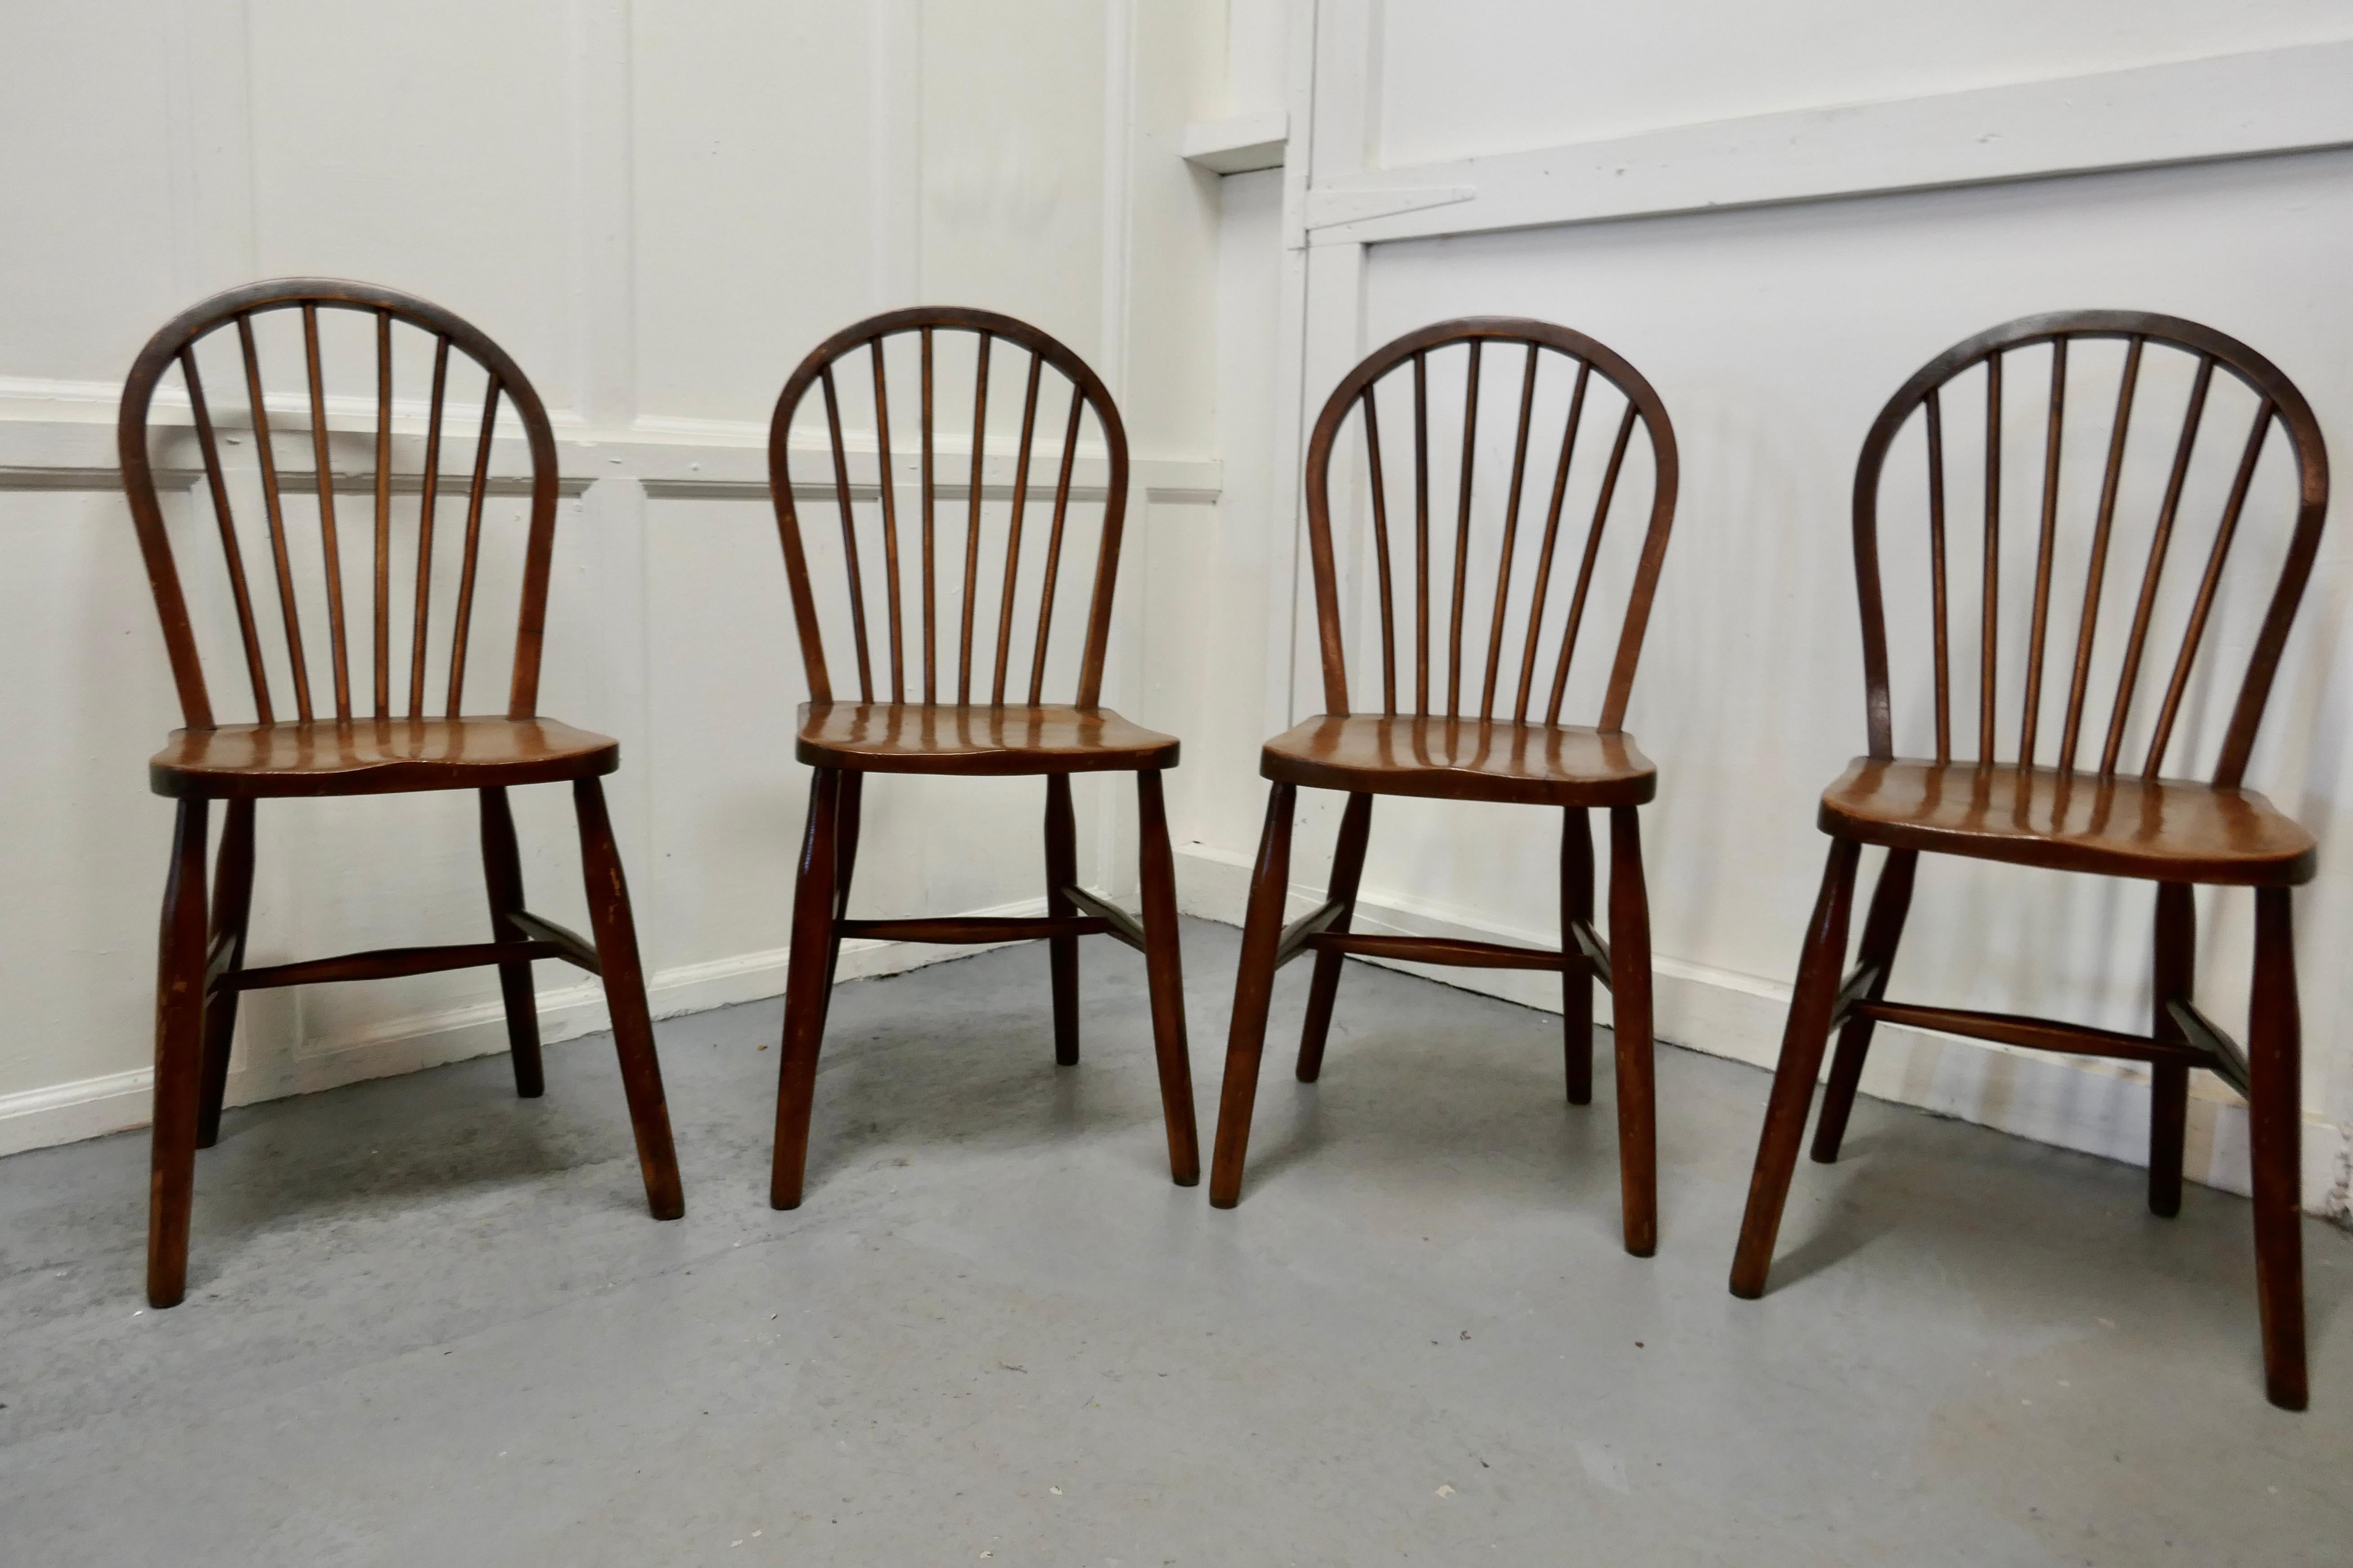 4 high Wycombe beech & elm hoop back Windsor chairs

The chairs are a classic design and traditionally made from solid wood they have hoop backs in the traditional Windsor style with spindles 
 
These are very sturdy chairs, the joints are all